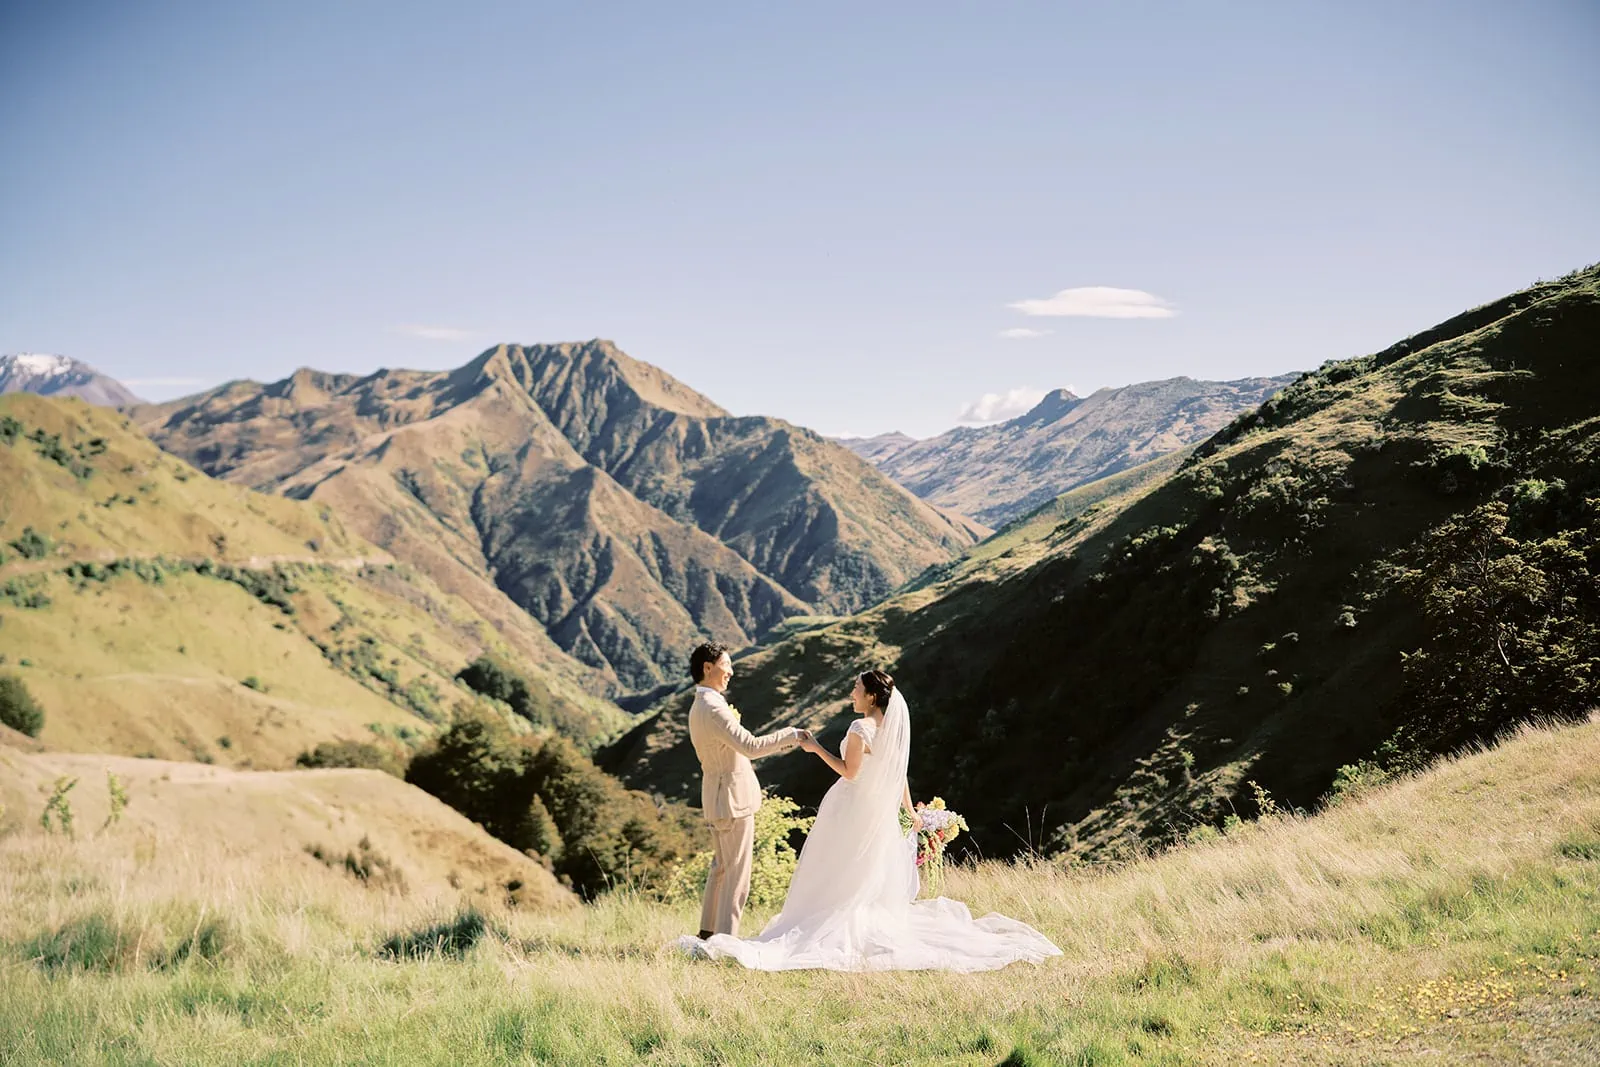 Queenstown Elopement Heli Wedding Photographer クイーンズタウン結婚式 | Taisei and Saki, a bride and groom, standing on a grassy hill in Queenstown.